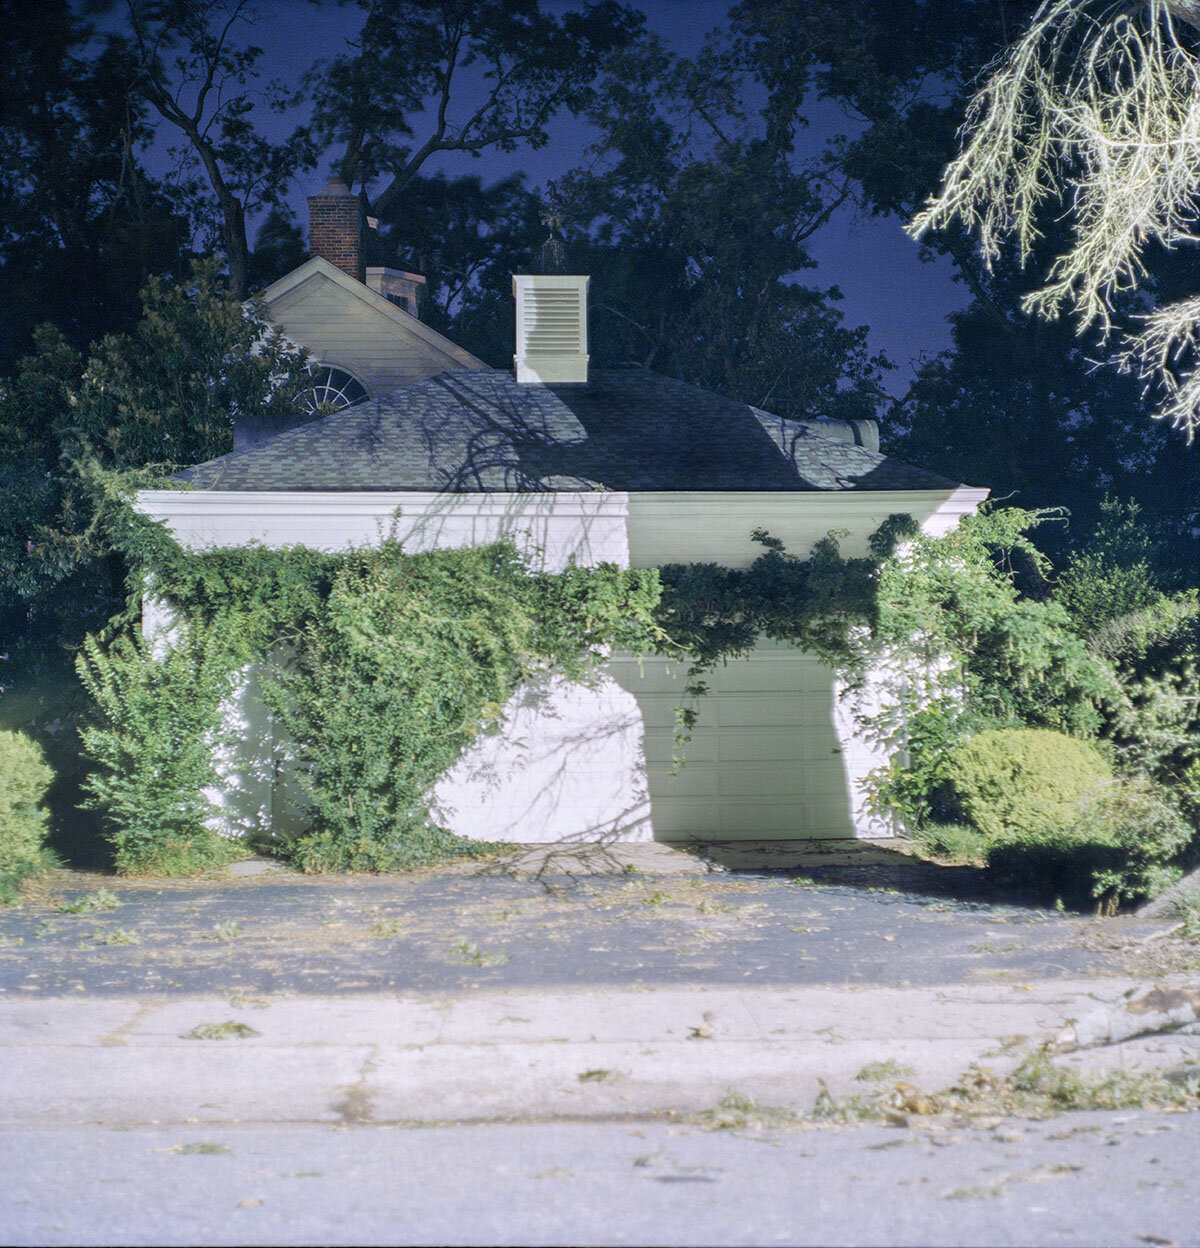  Dana Smessaert   The Lang House , 2020  From the series: An Obligation to do One’s Best  Color Negative Print  